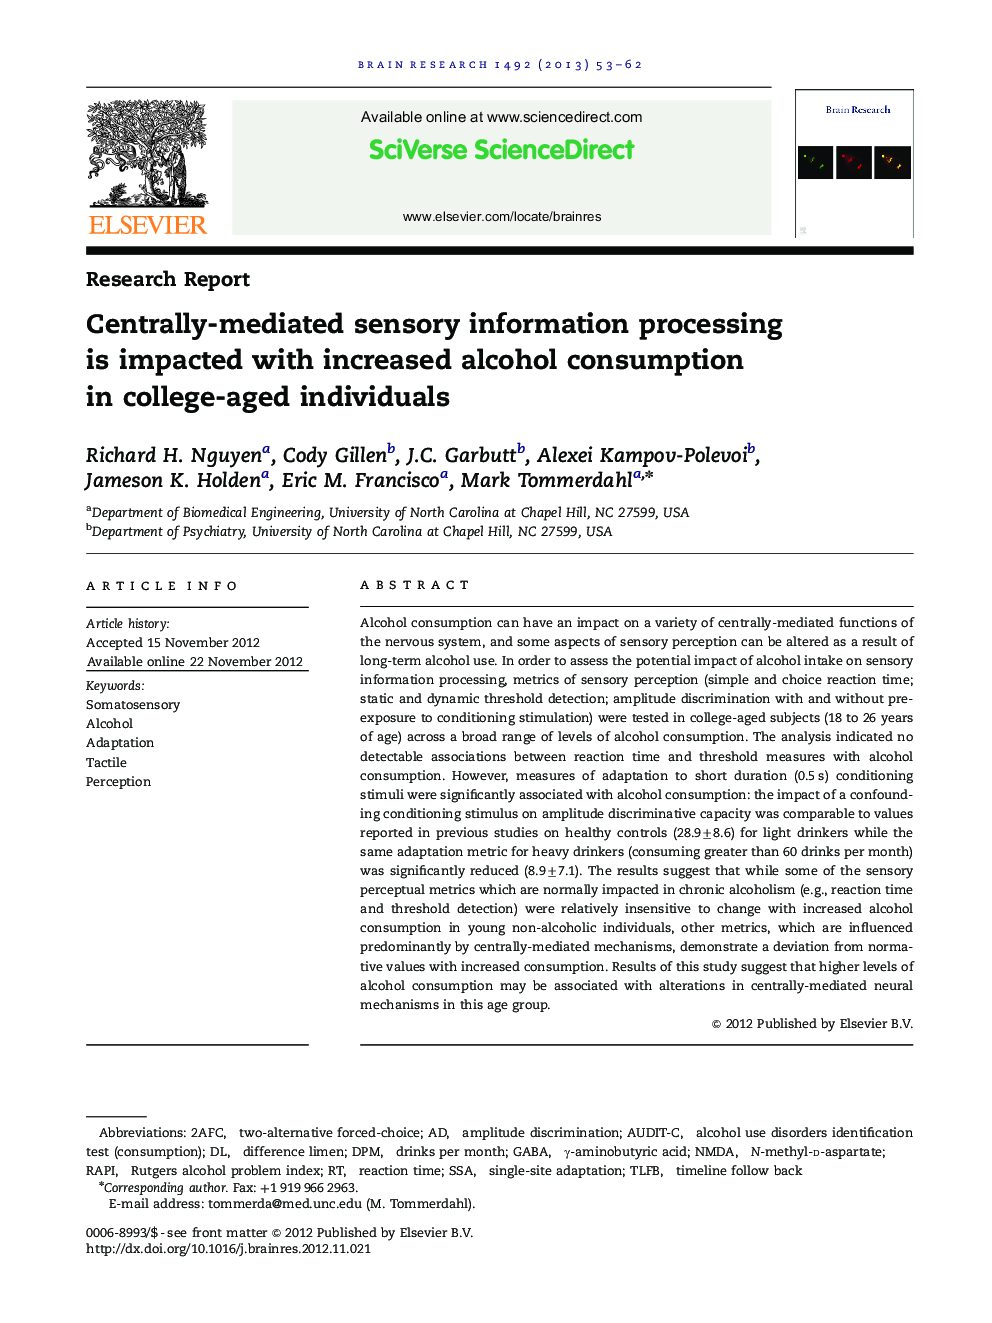 Research ReportCentrally-mediated sensory information processing is impacted with increased alcohol consumption in college-aged individuals